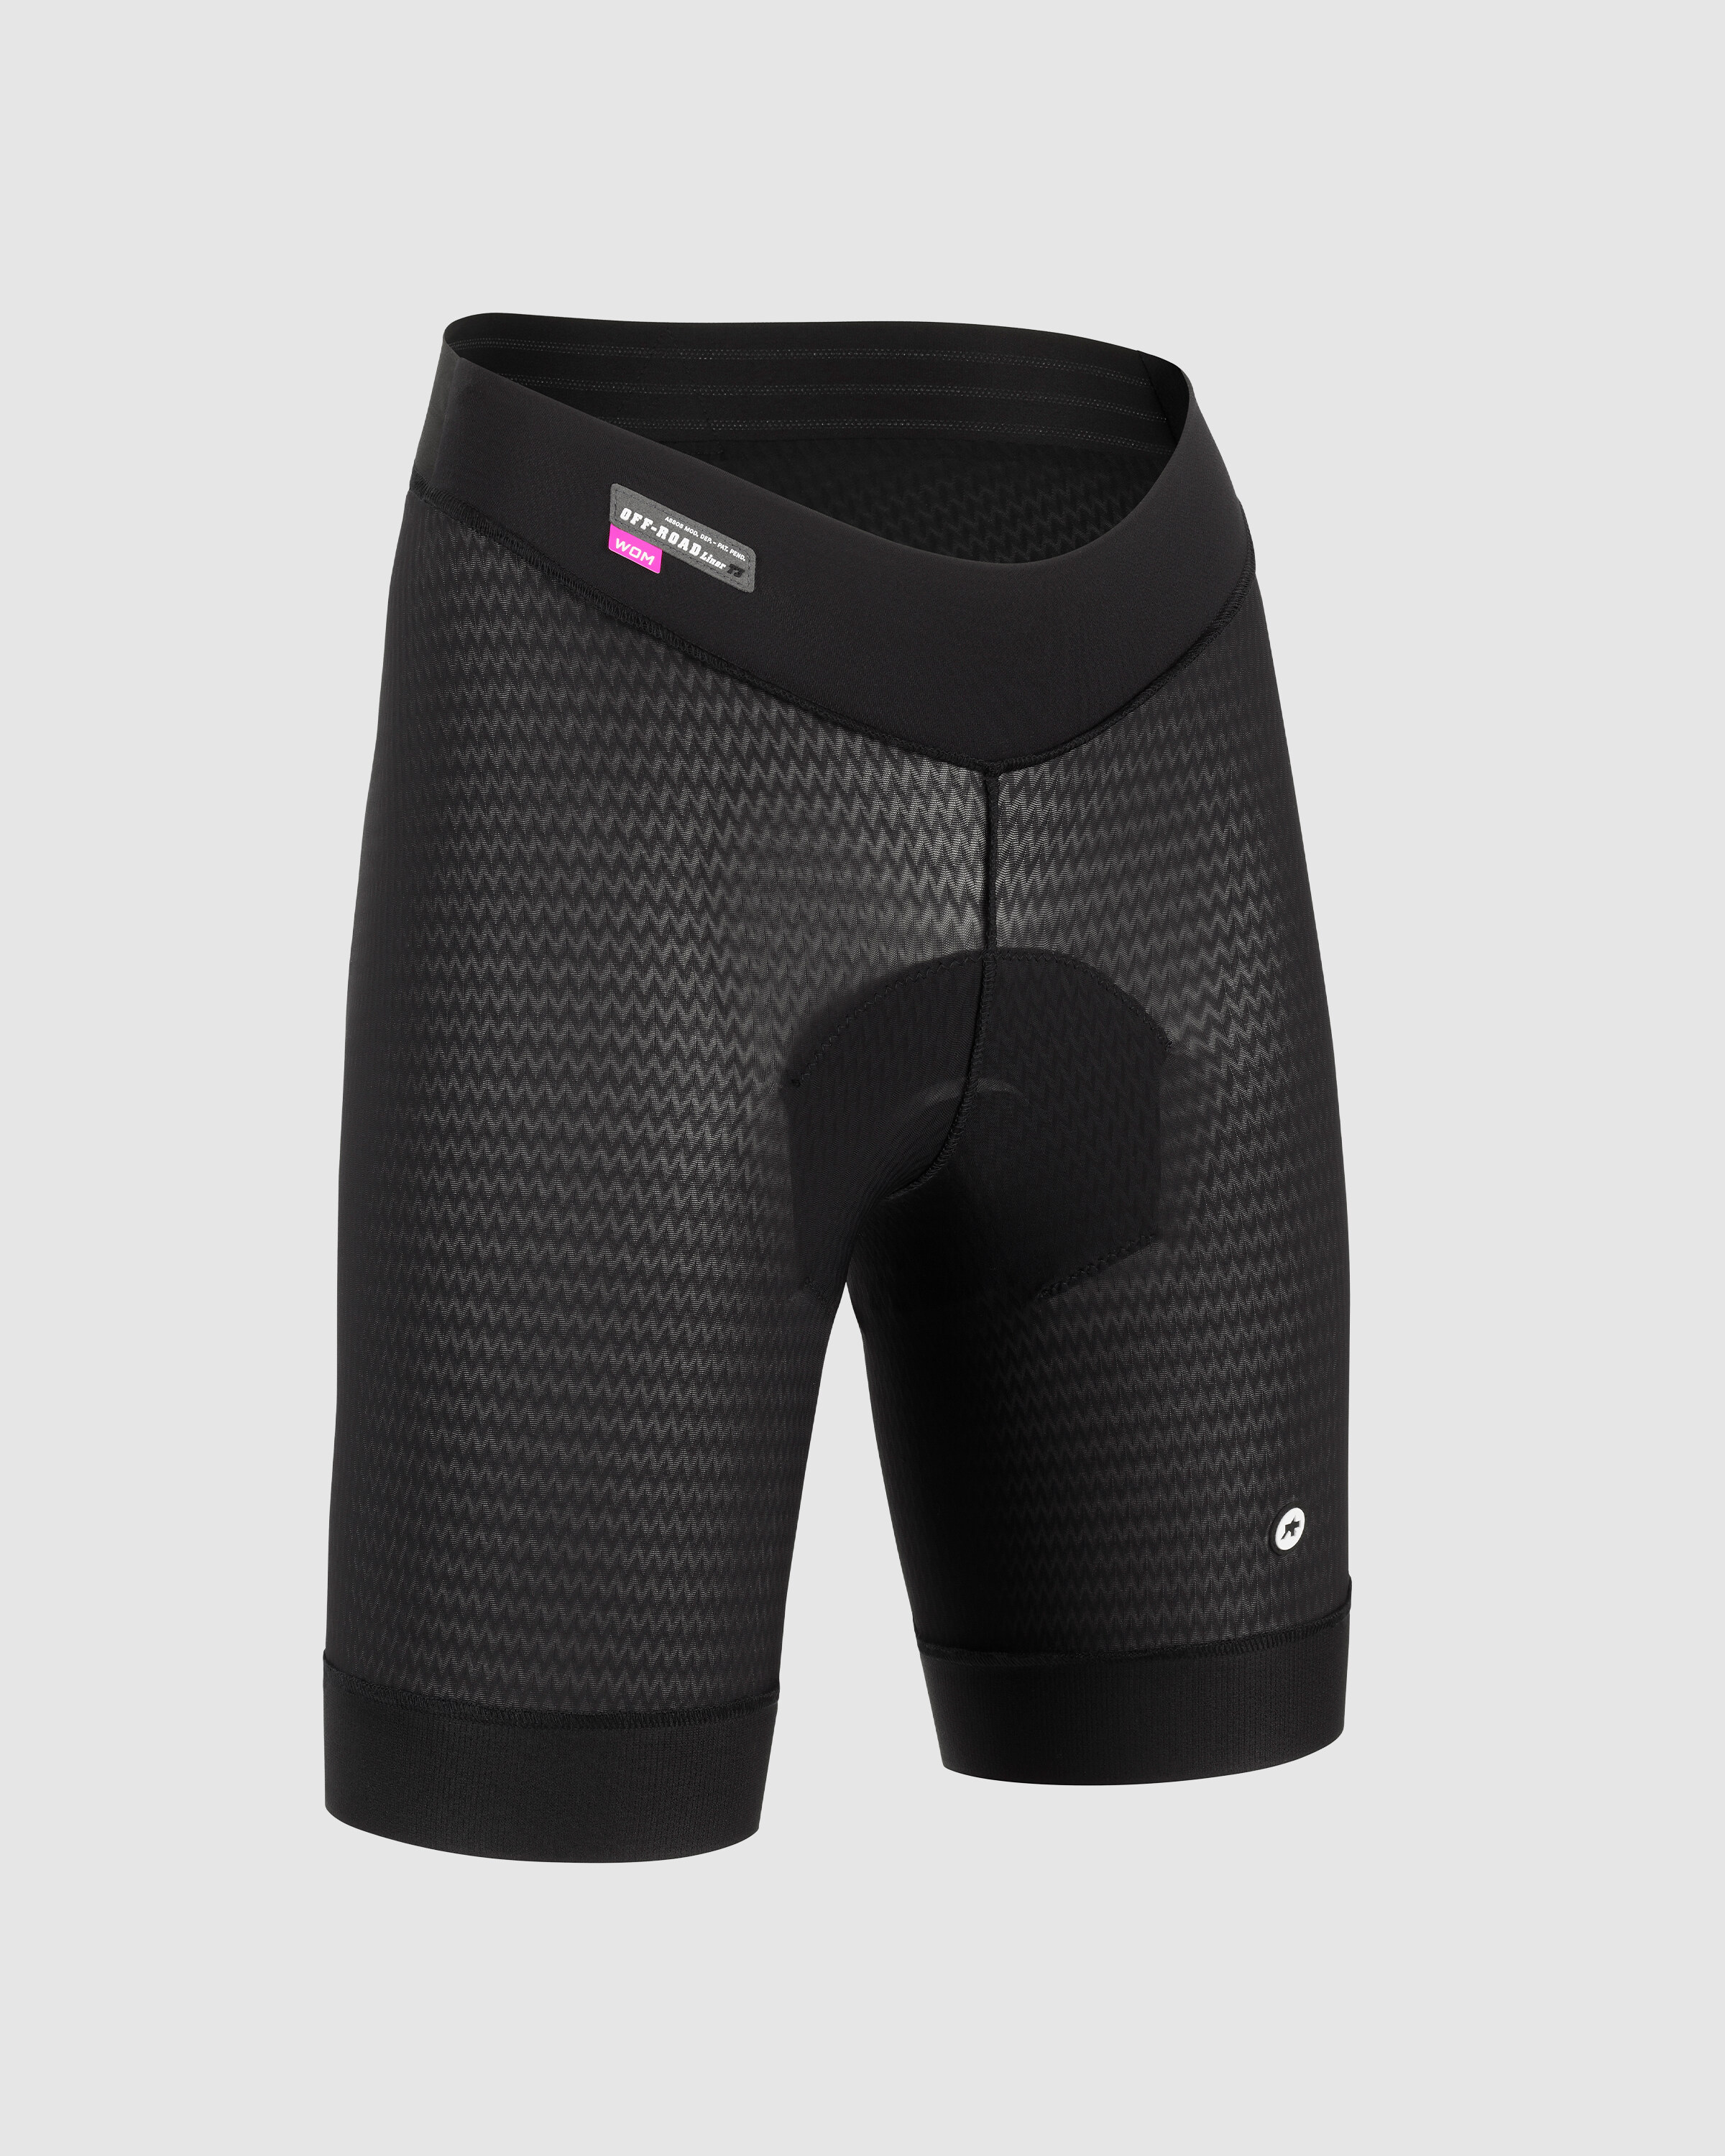 Trail Tactica Women's Liner Shorts ST T3, blackSeries » ASSOS Of